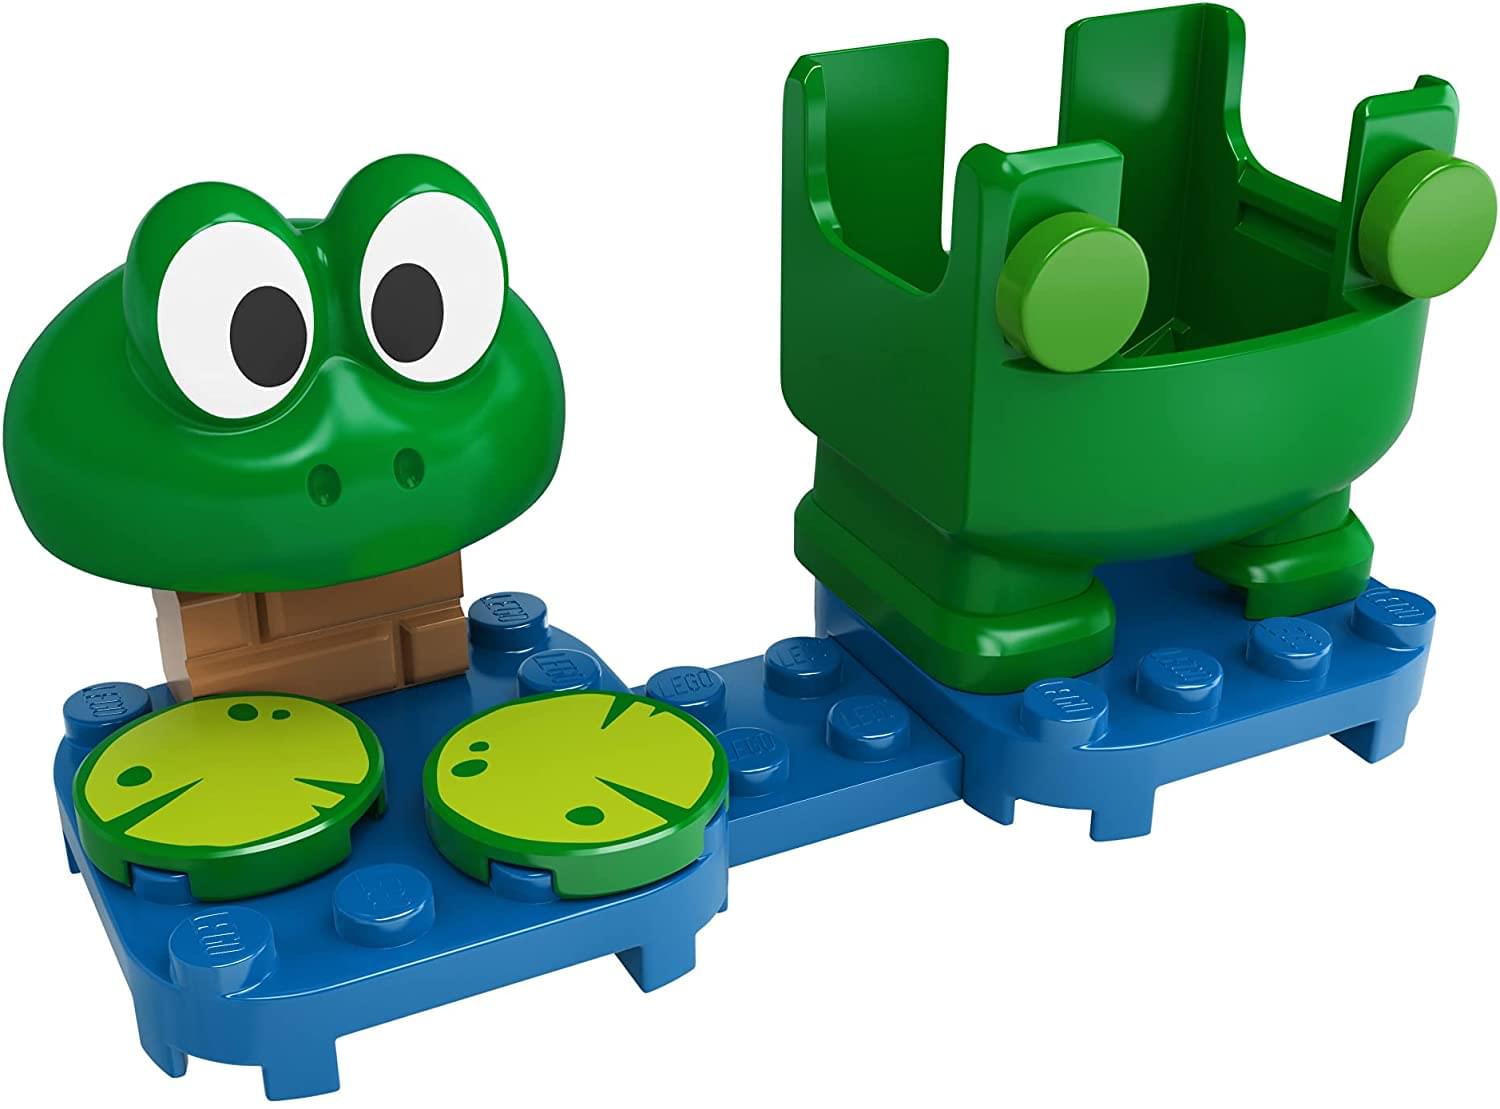 LEGO Super Mario 71392 Frog Mario Power-Up Pack 11 Piece Building Kit